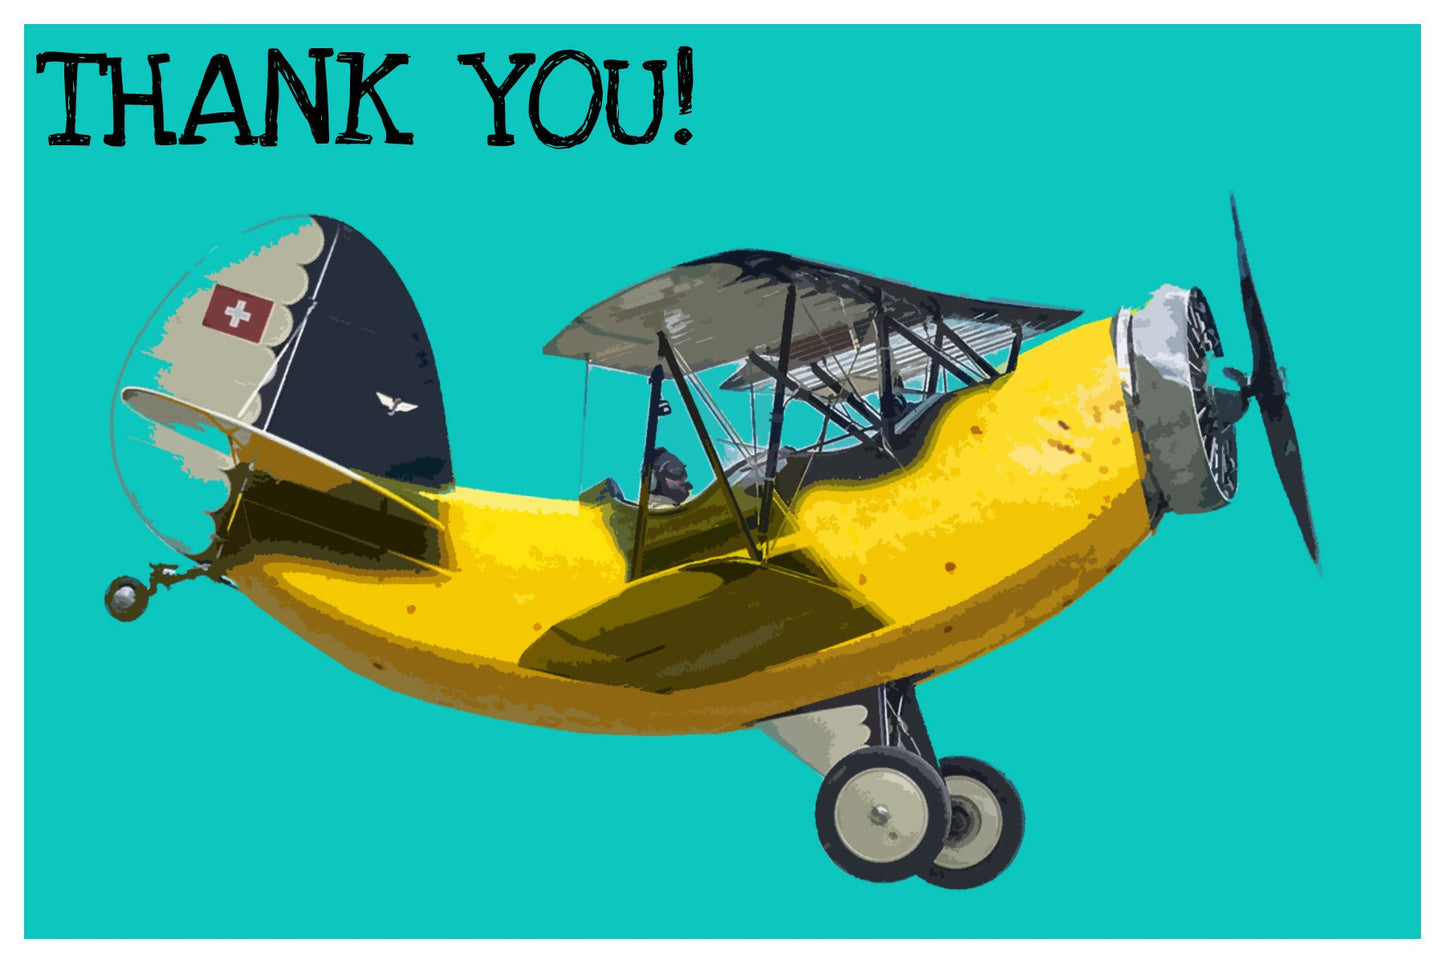 Banana Airplane Thank You Postcards - 10 post card set - Surrealist pop art thank you cards for any occasion - mailing, collage or scrapbook